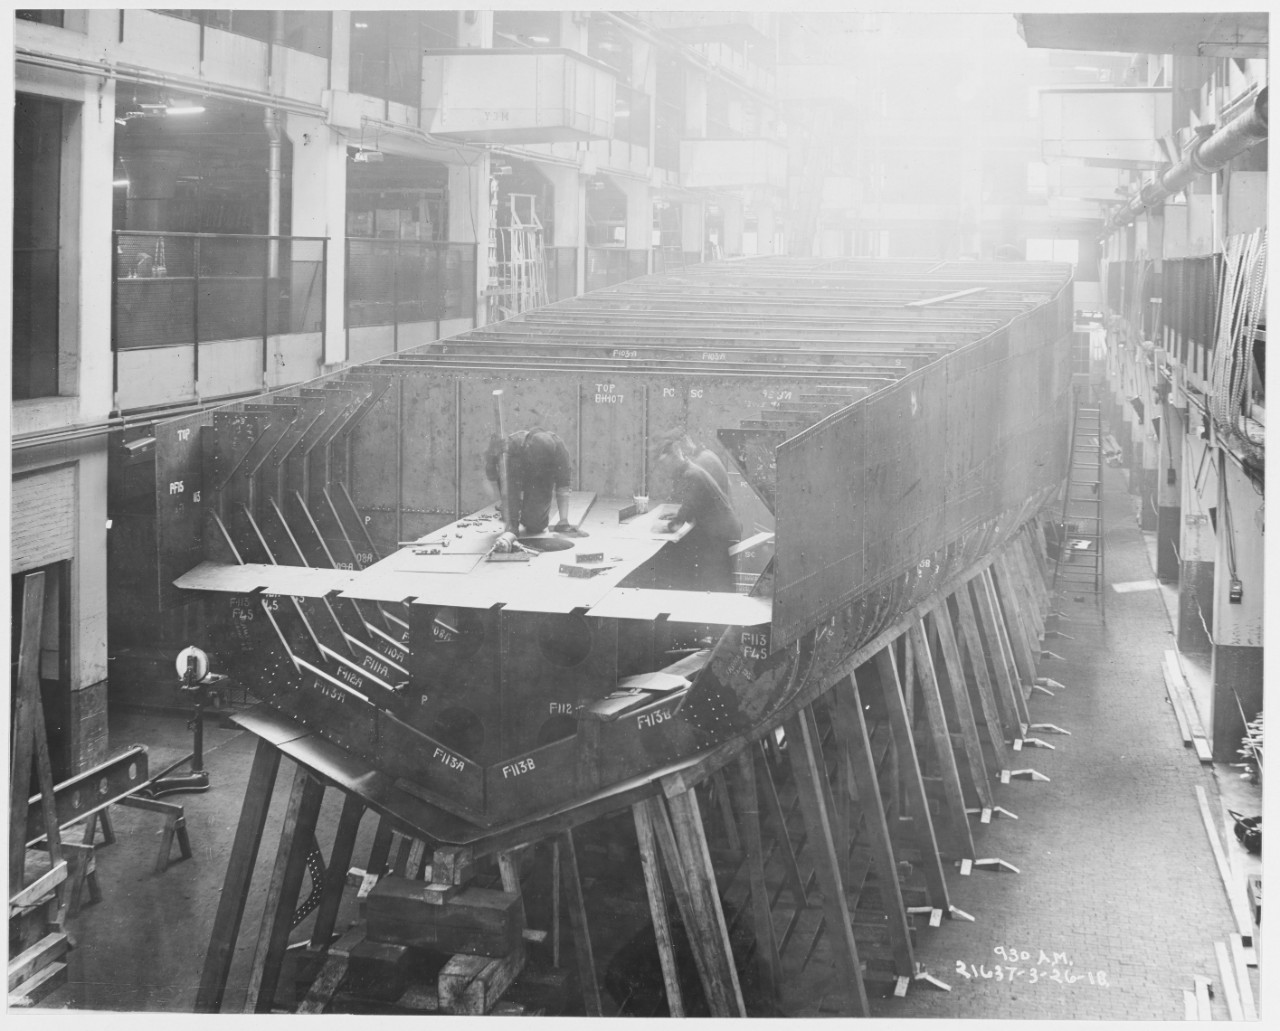 Construction of Ford Eagle Boats (200' Patrol Boats #1 to 60) Ford Motor Company, March 26, 1918